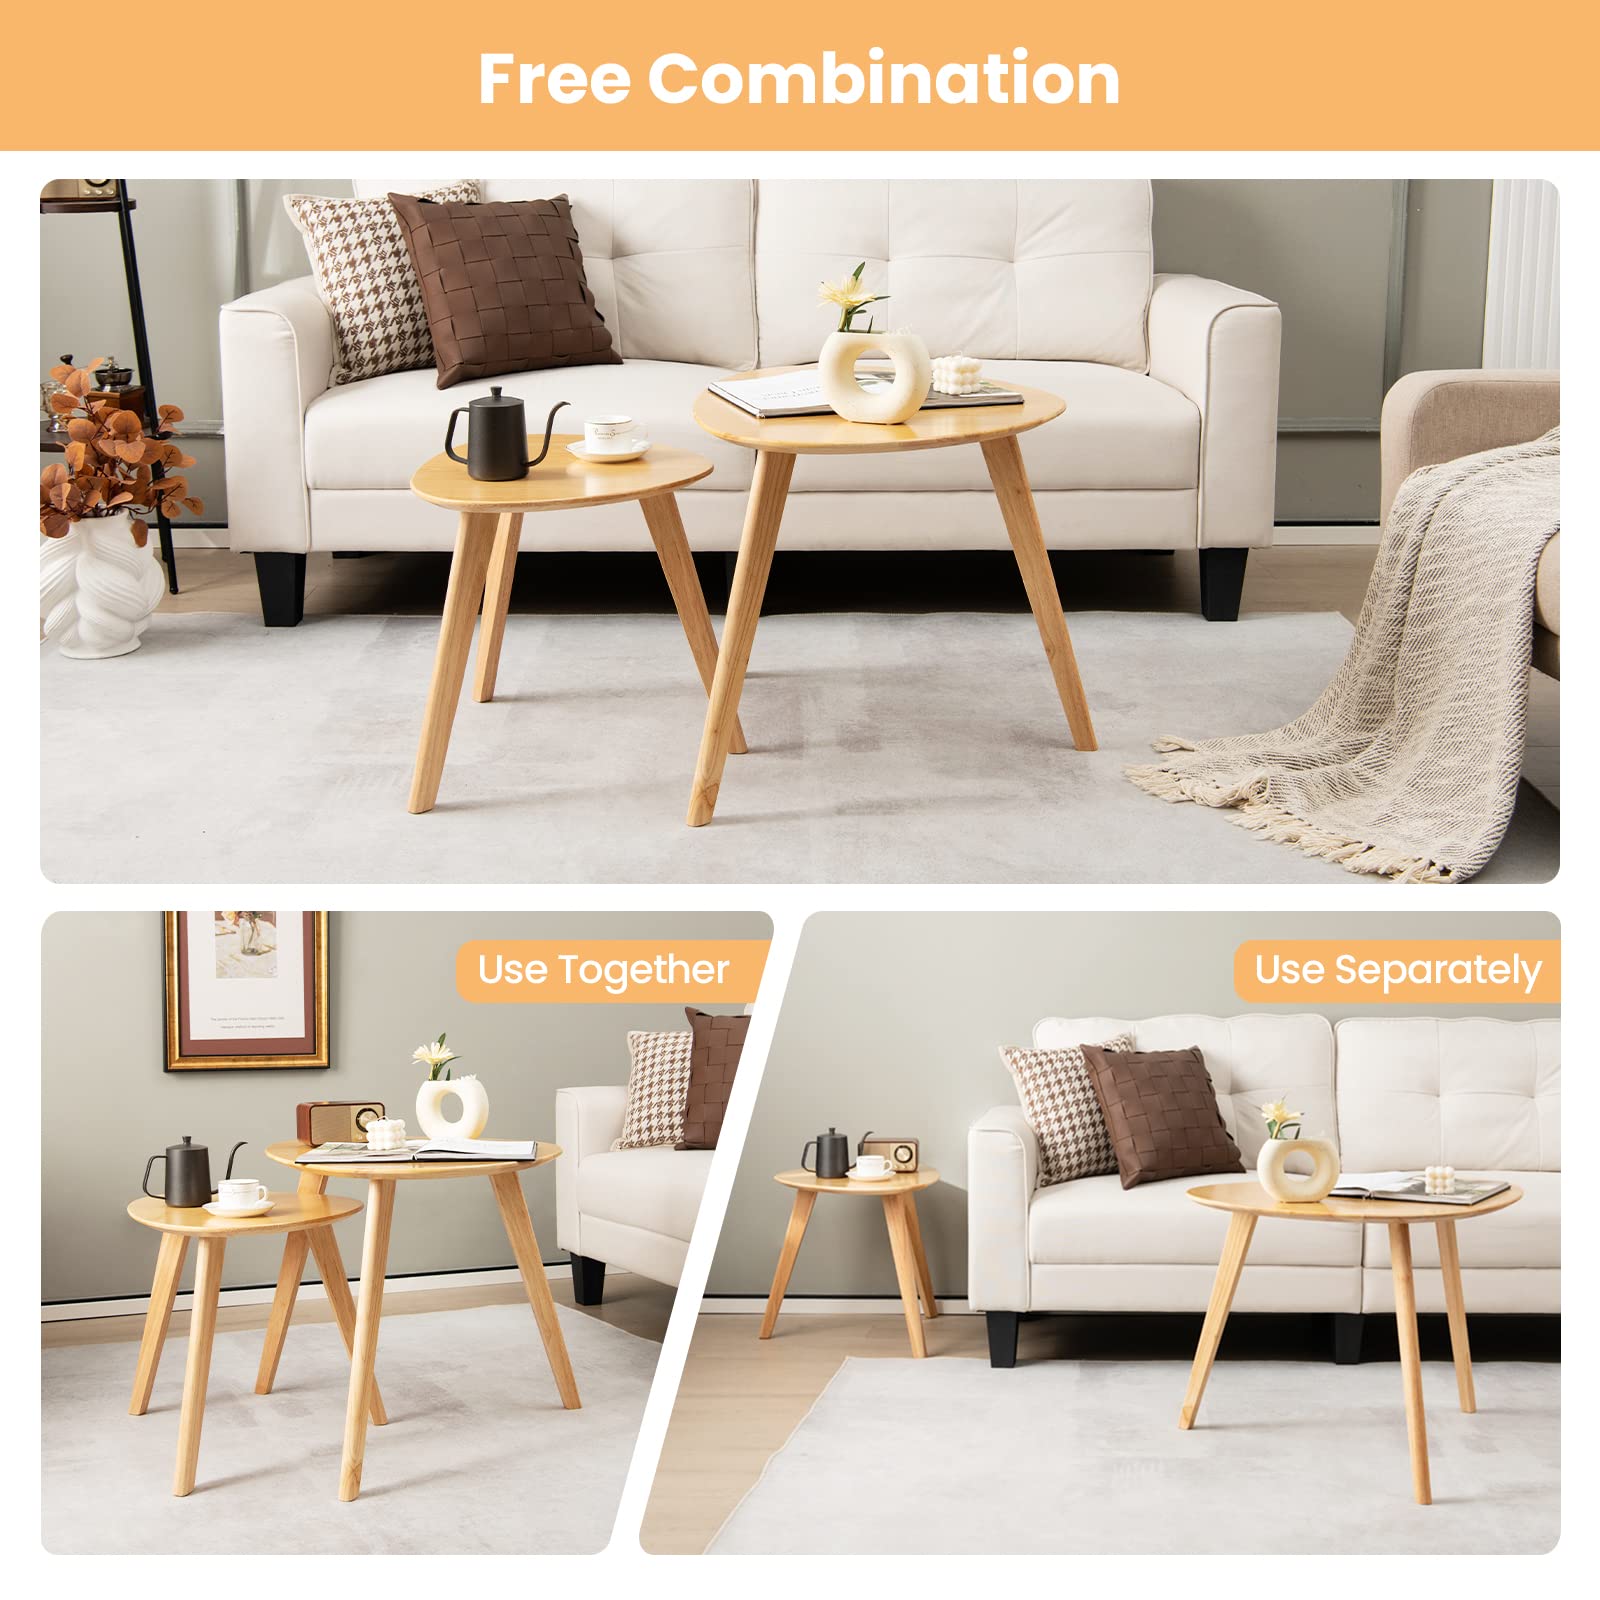 Giantex Set of 2 Nesting Coffee Tables, 2 PCS Oval Wood Sofa End Tables with Rubber Wood Legs, Natural